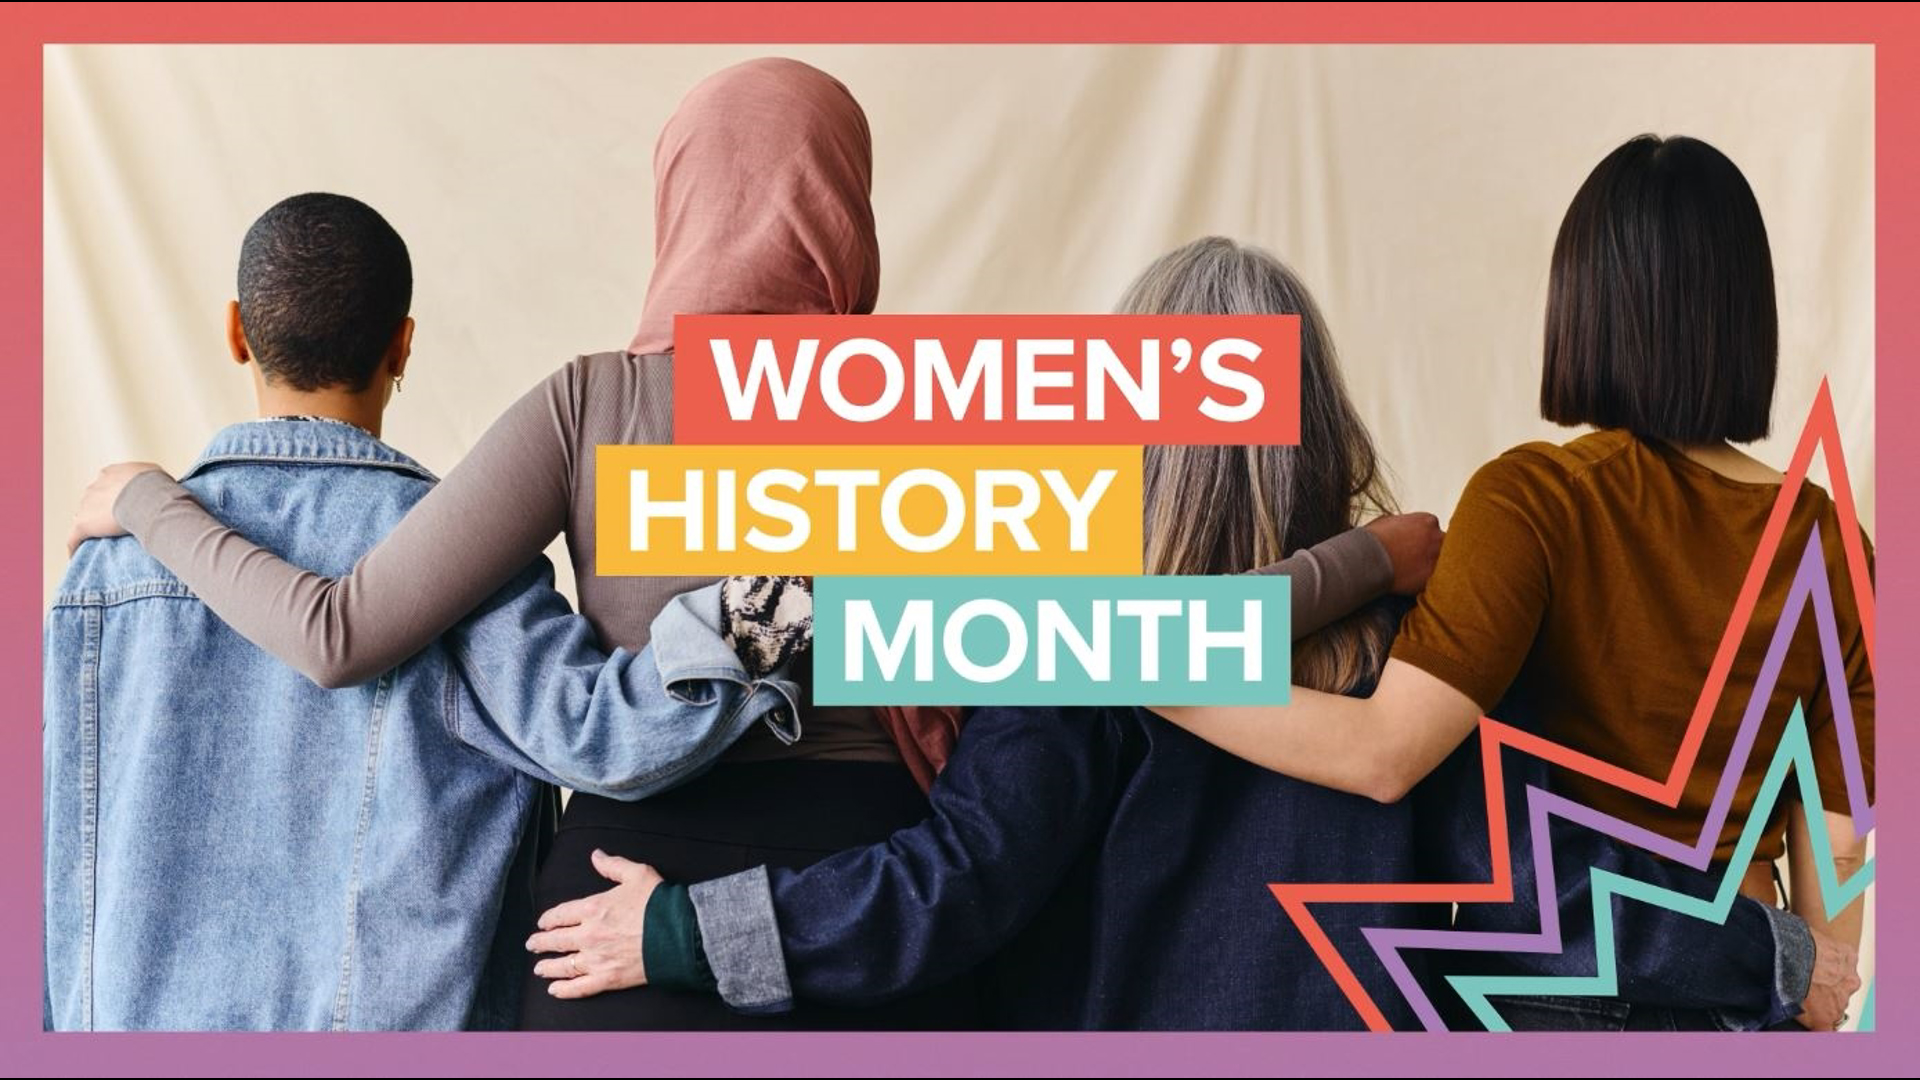 A look back at how women's history month got started, as well as some profiles of amazing women then and now that are breaking barriers and inspiring others.